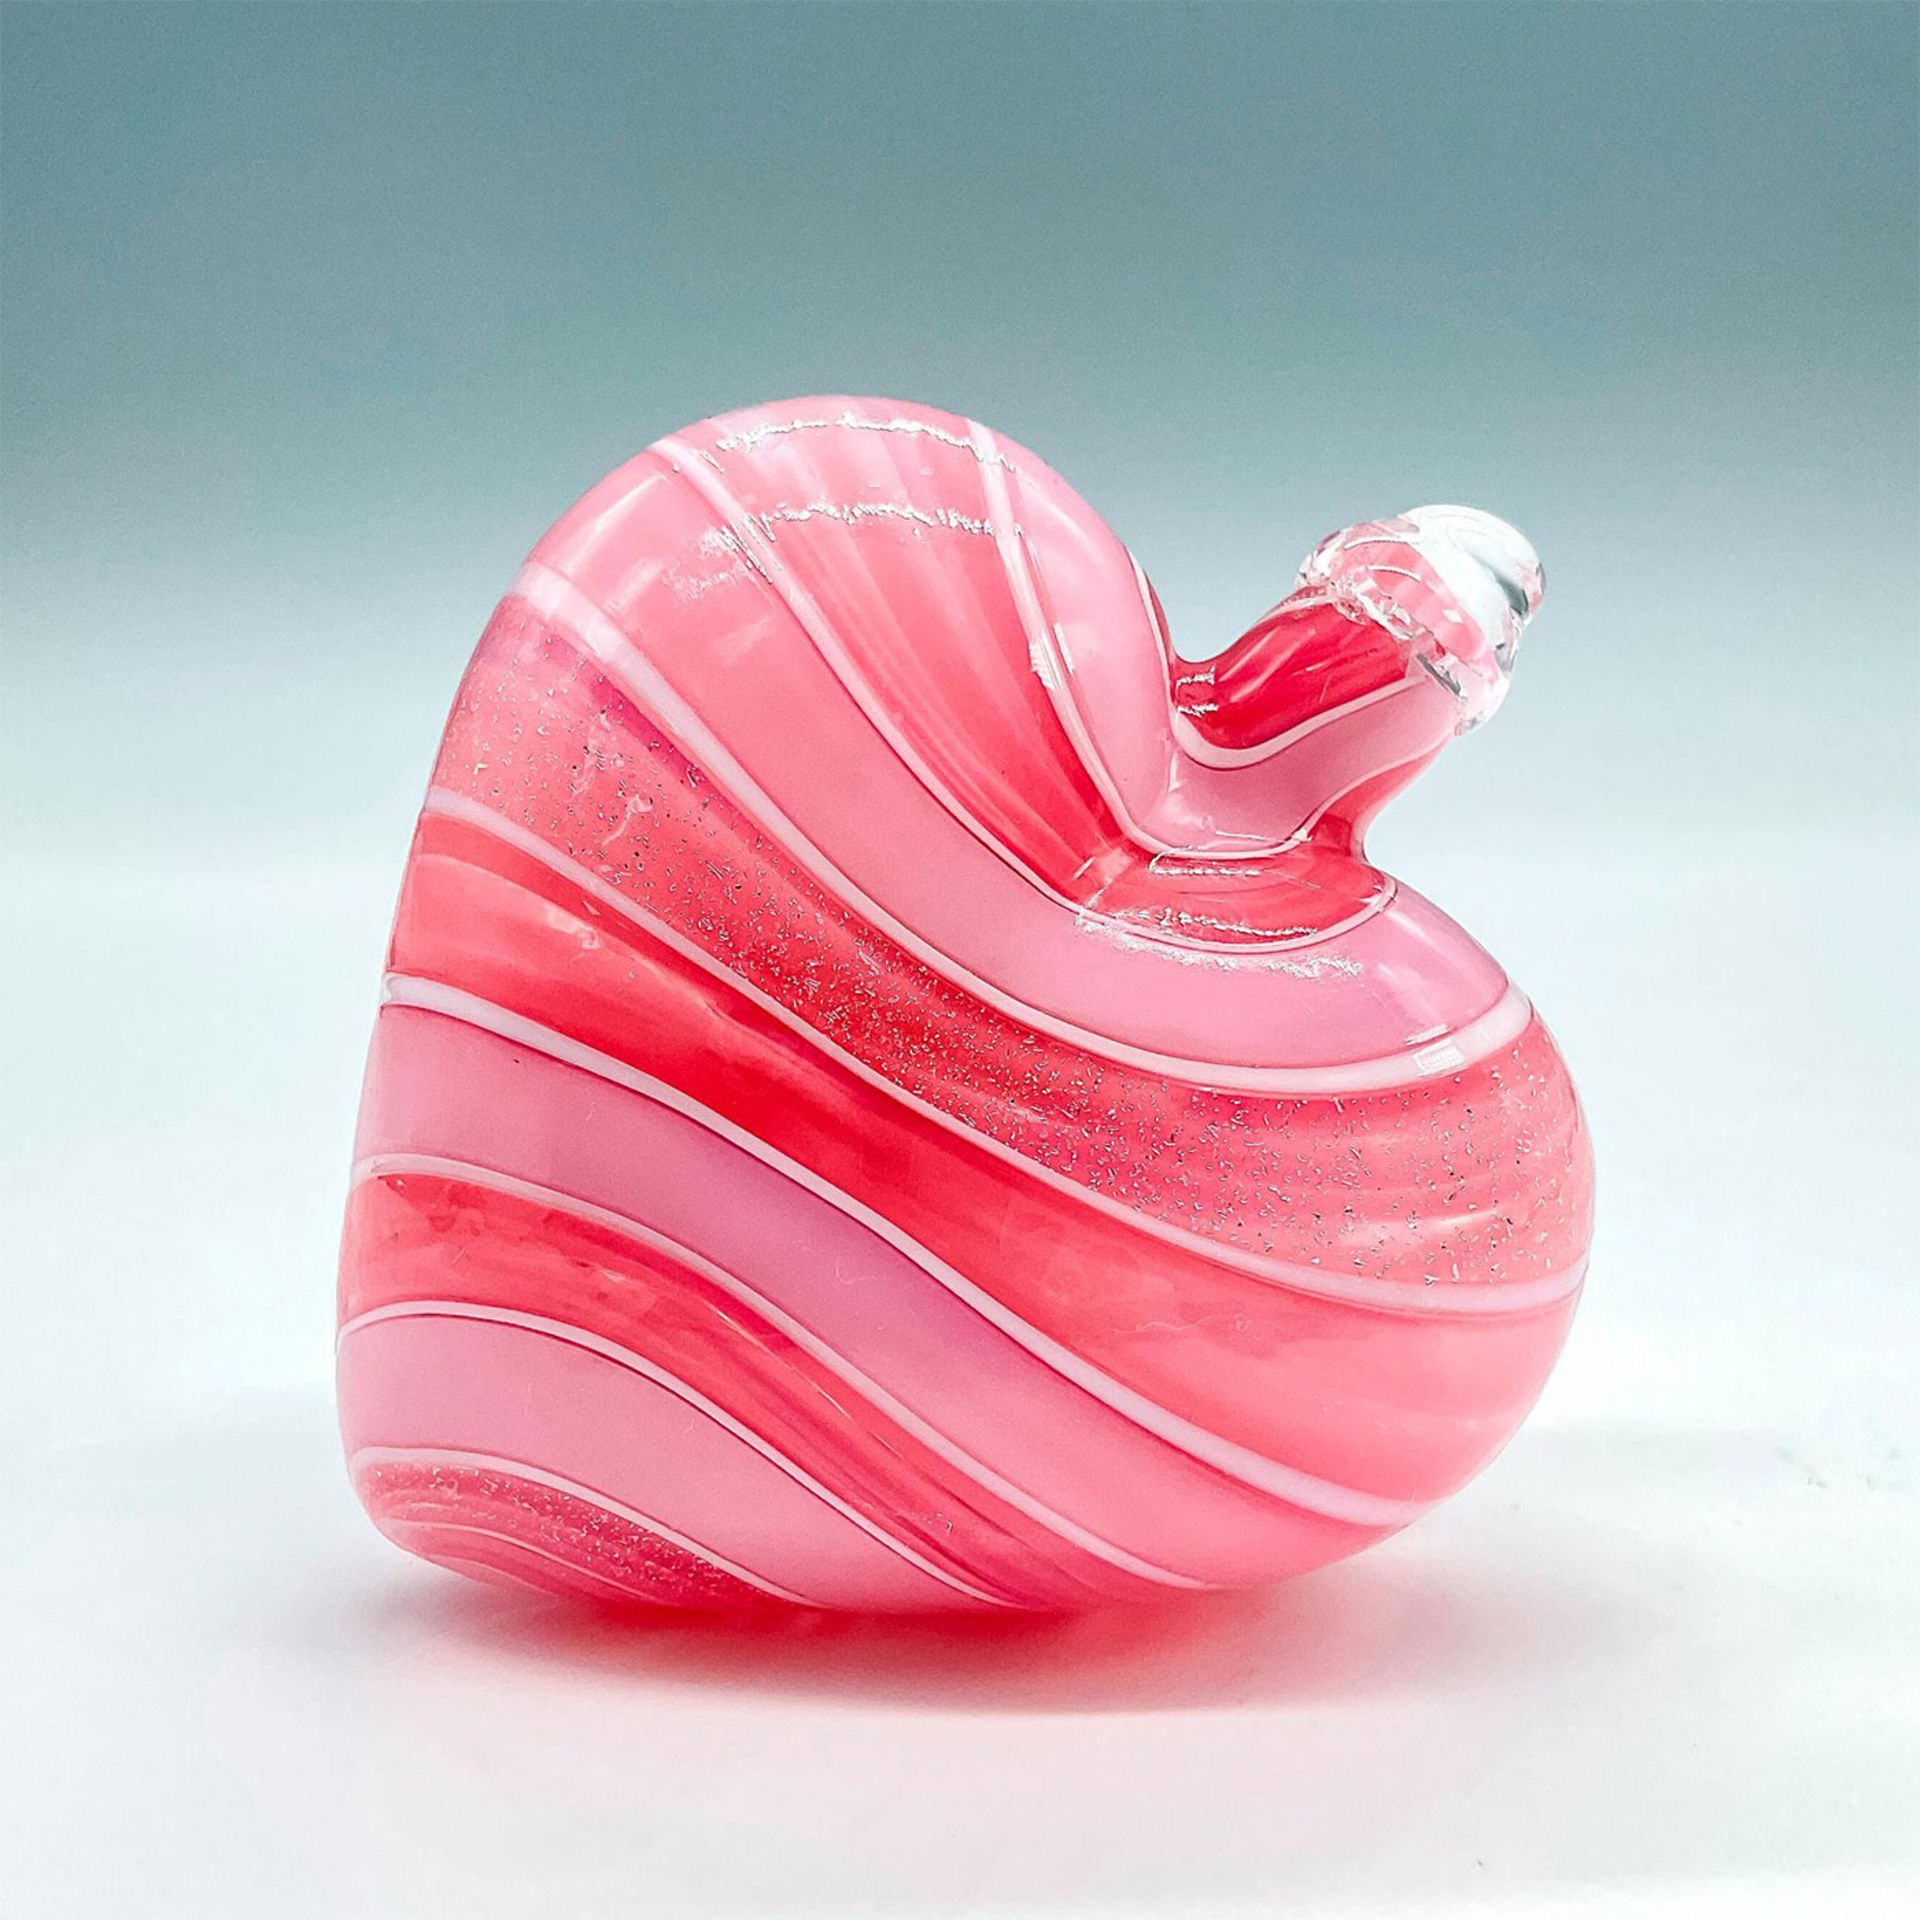 Blown Art Glass Heart Shaped Paperweight - Image 2 of 2